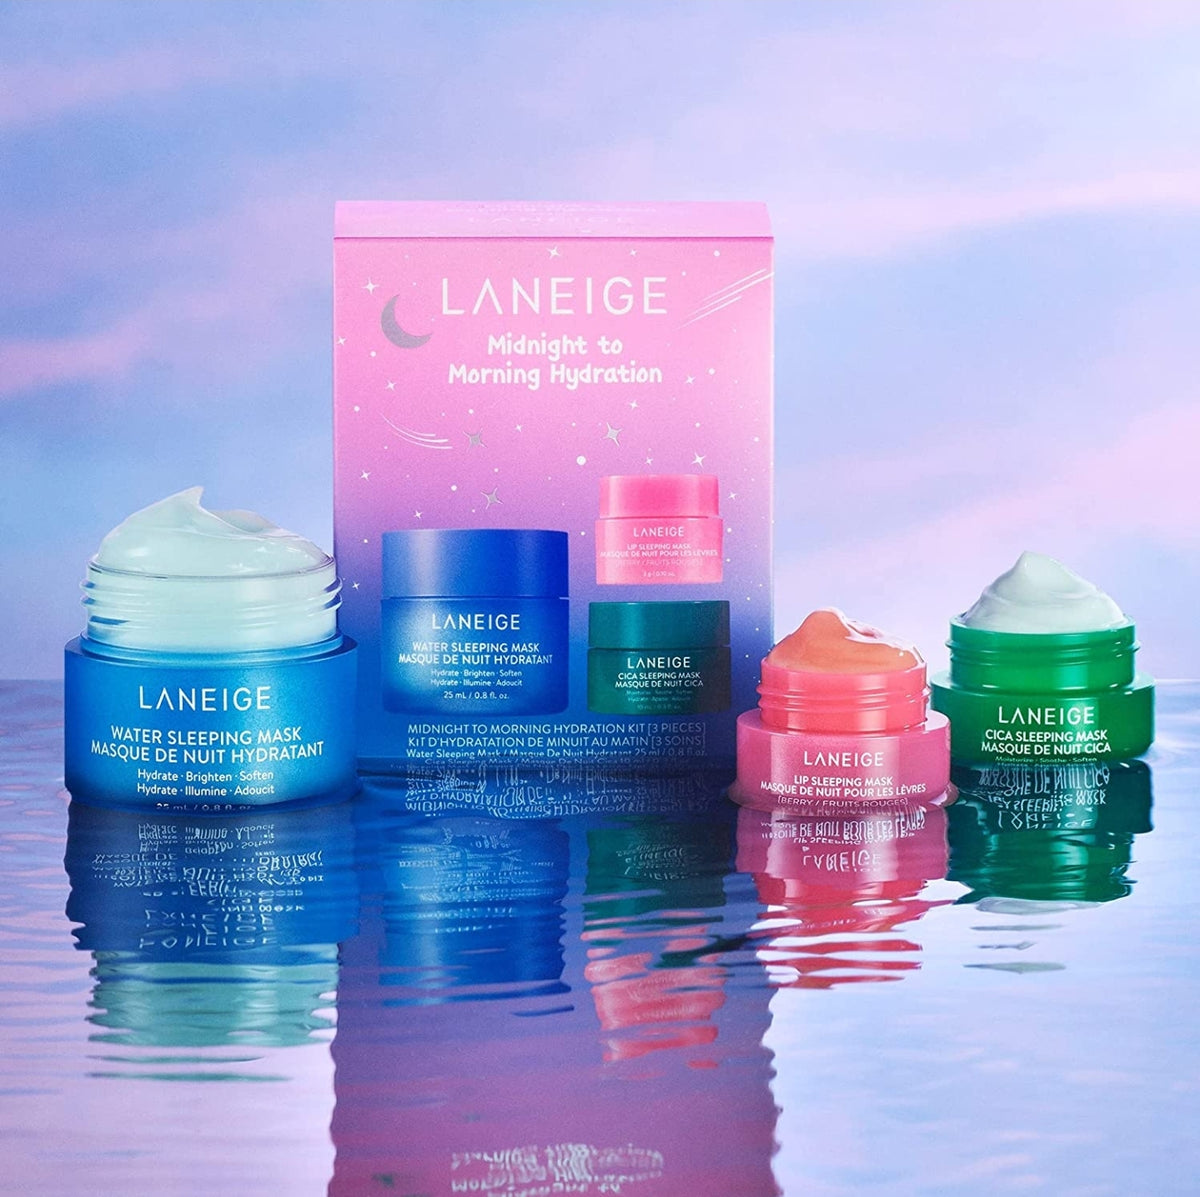 LANEIGE Water Sleeping Mask: Visibly Brighten, Boost Hydration, Squalane, Sleep biome